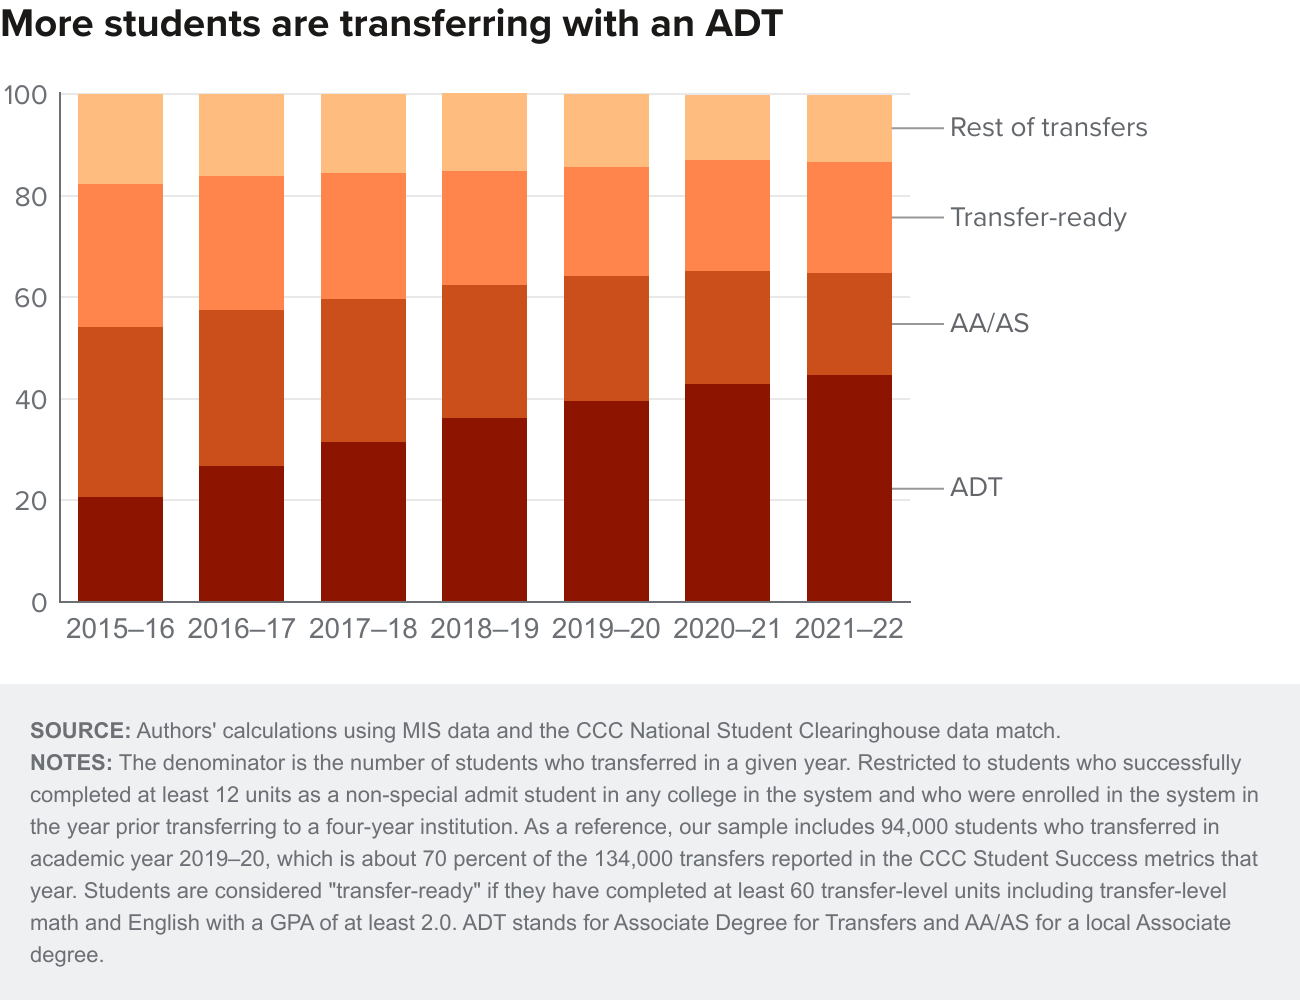 figure 12 - More students are transferring with an ADT